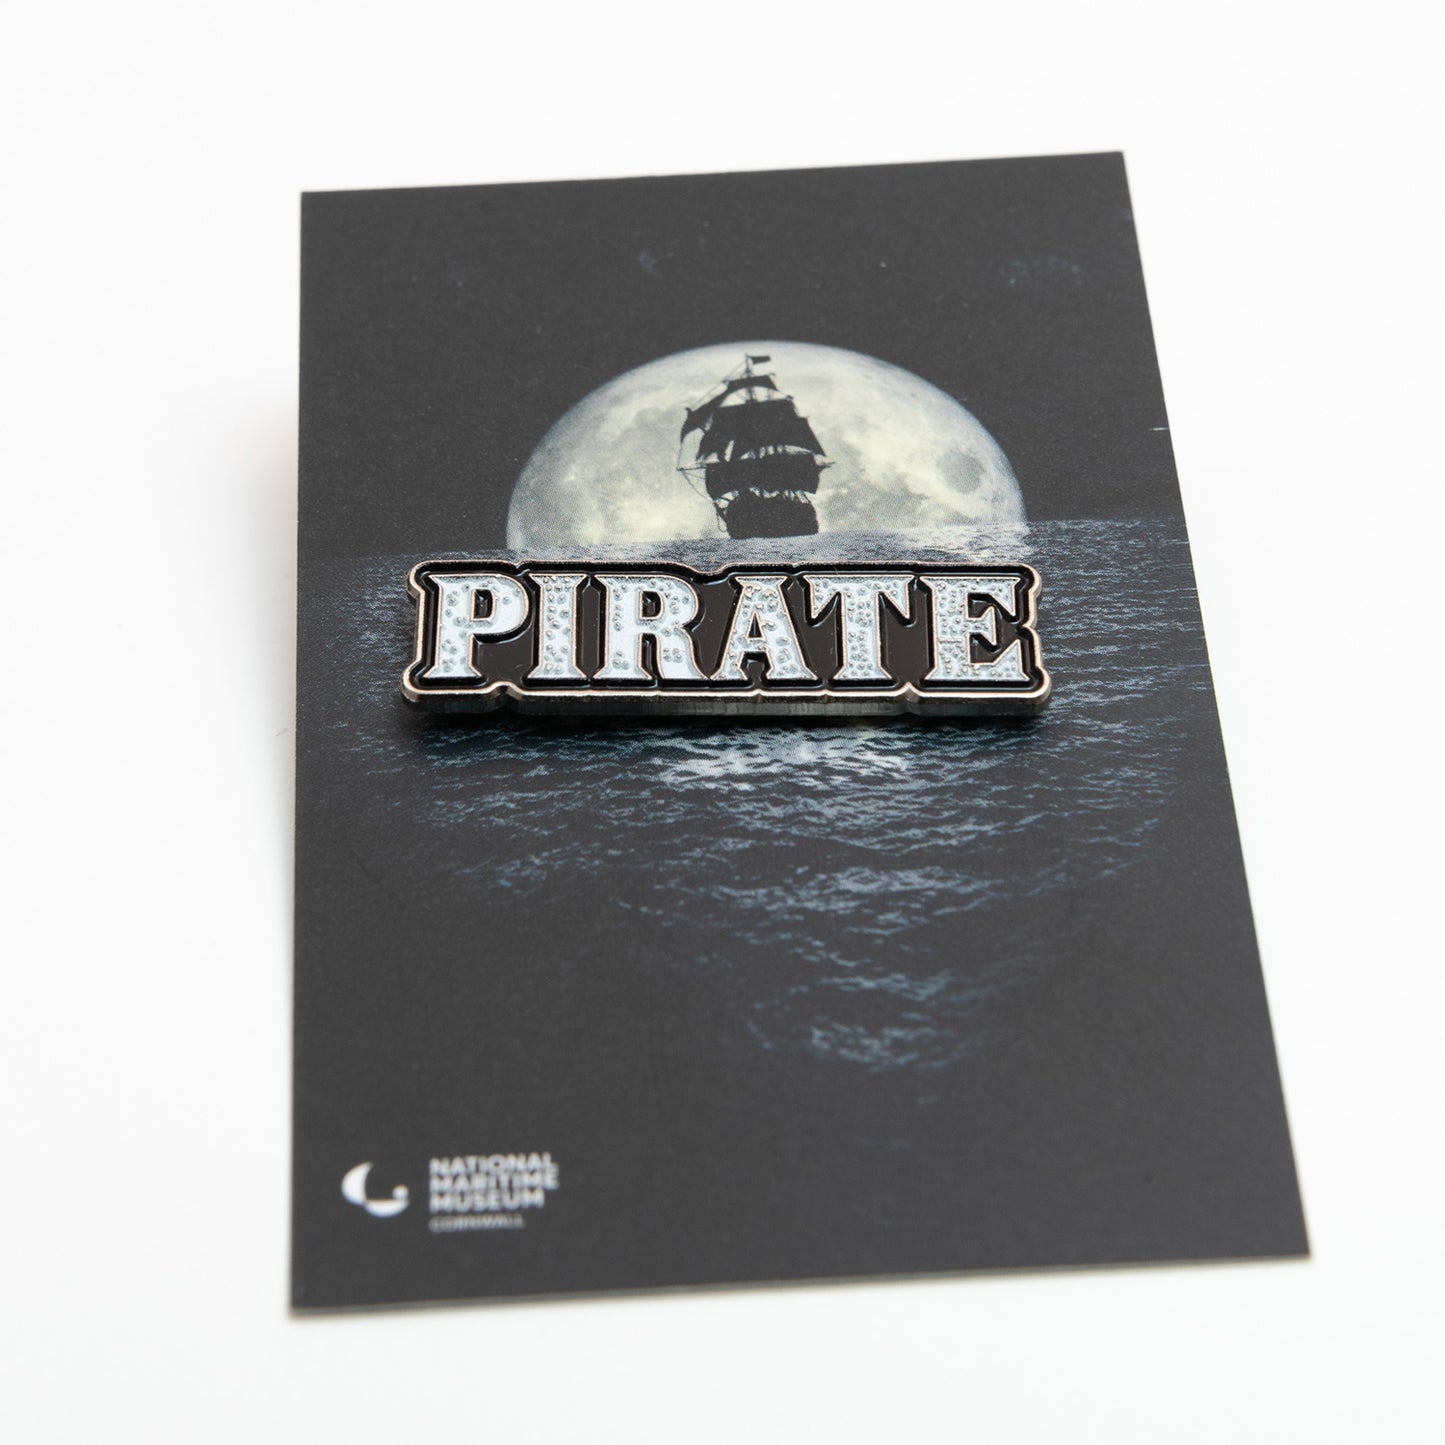 A photo of the National Maritime Museum Cornwall's Pirate Exhibition Pin Badge on branded cardboard, on a white background.